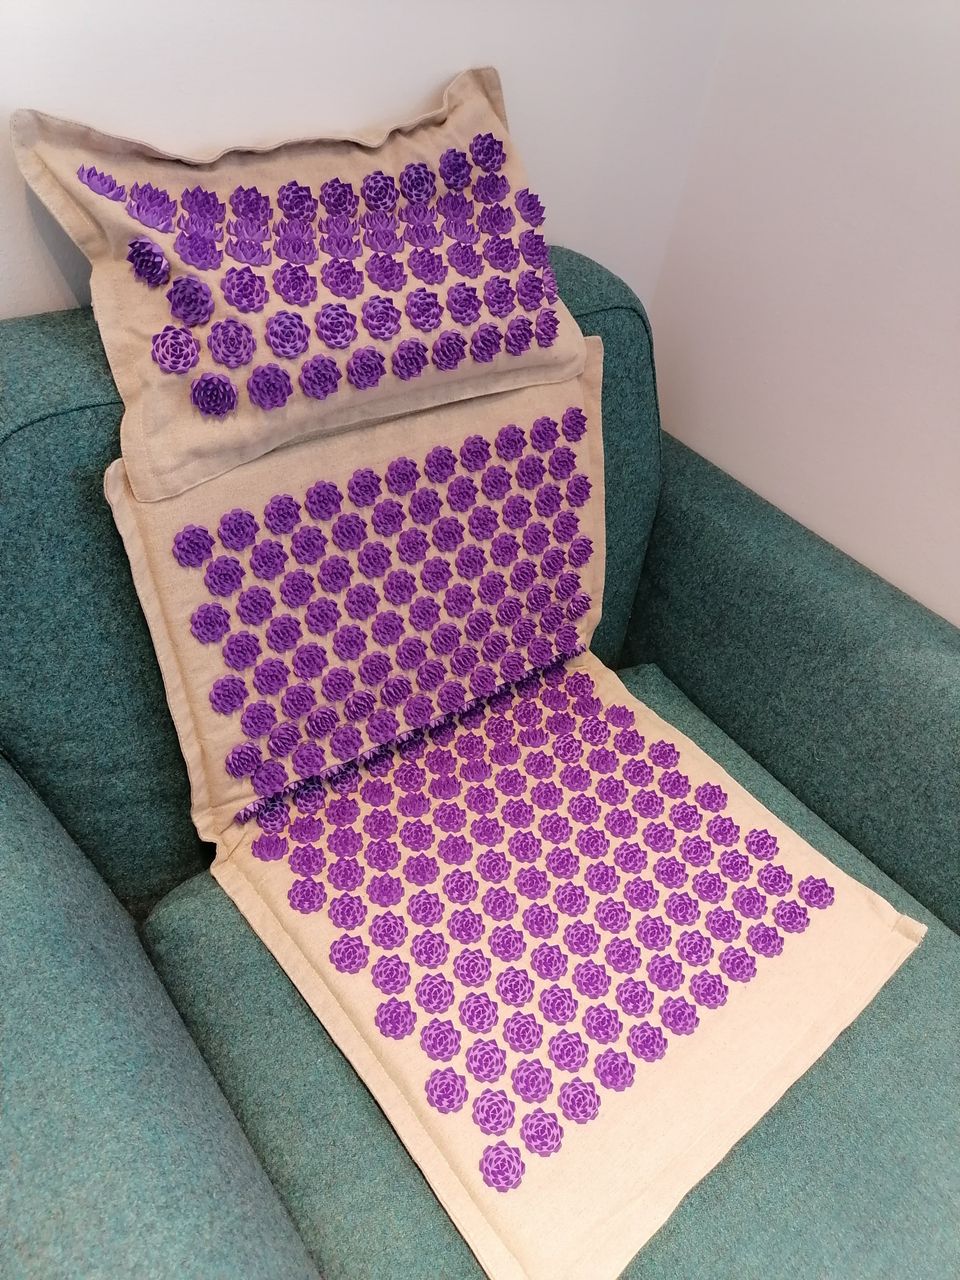 Fully natural acupressure massage mat and pillow